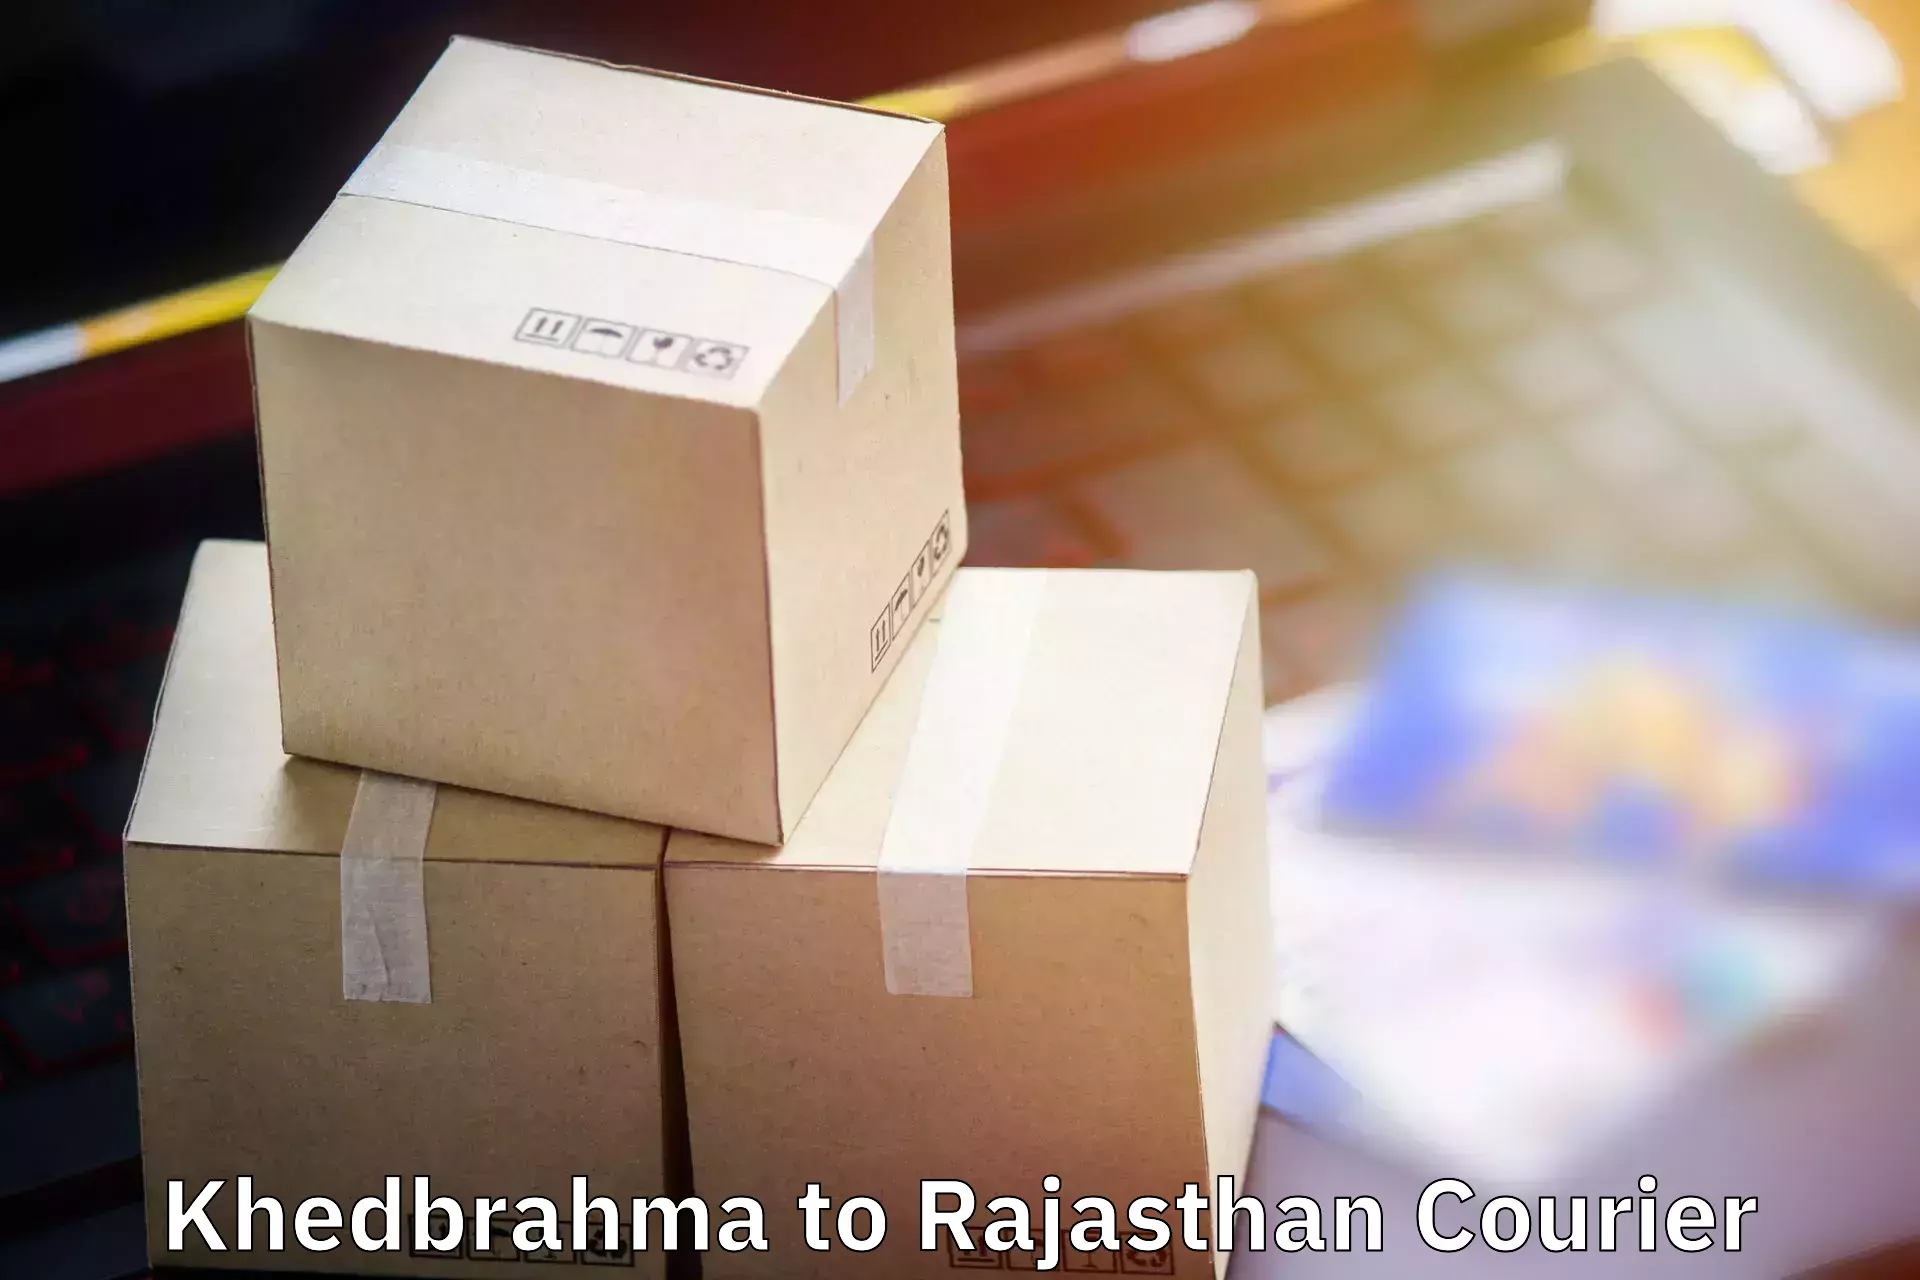 Baggage shipping experience Khedbrahma to Rajasthan